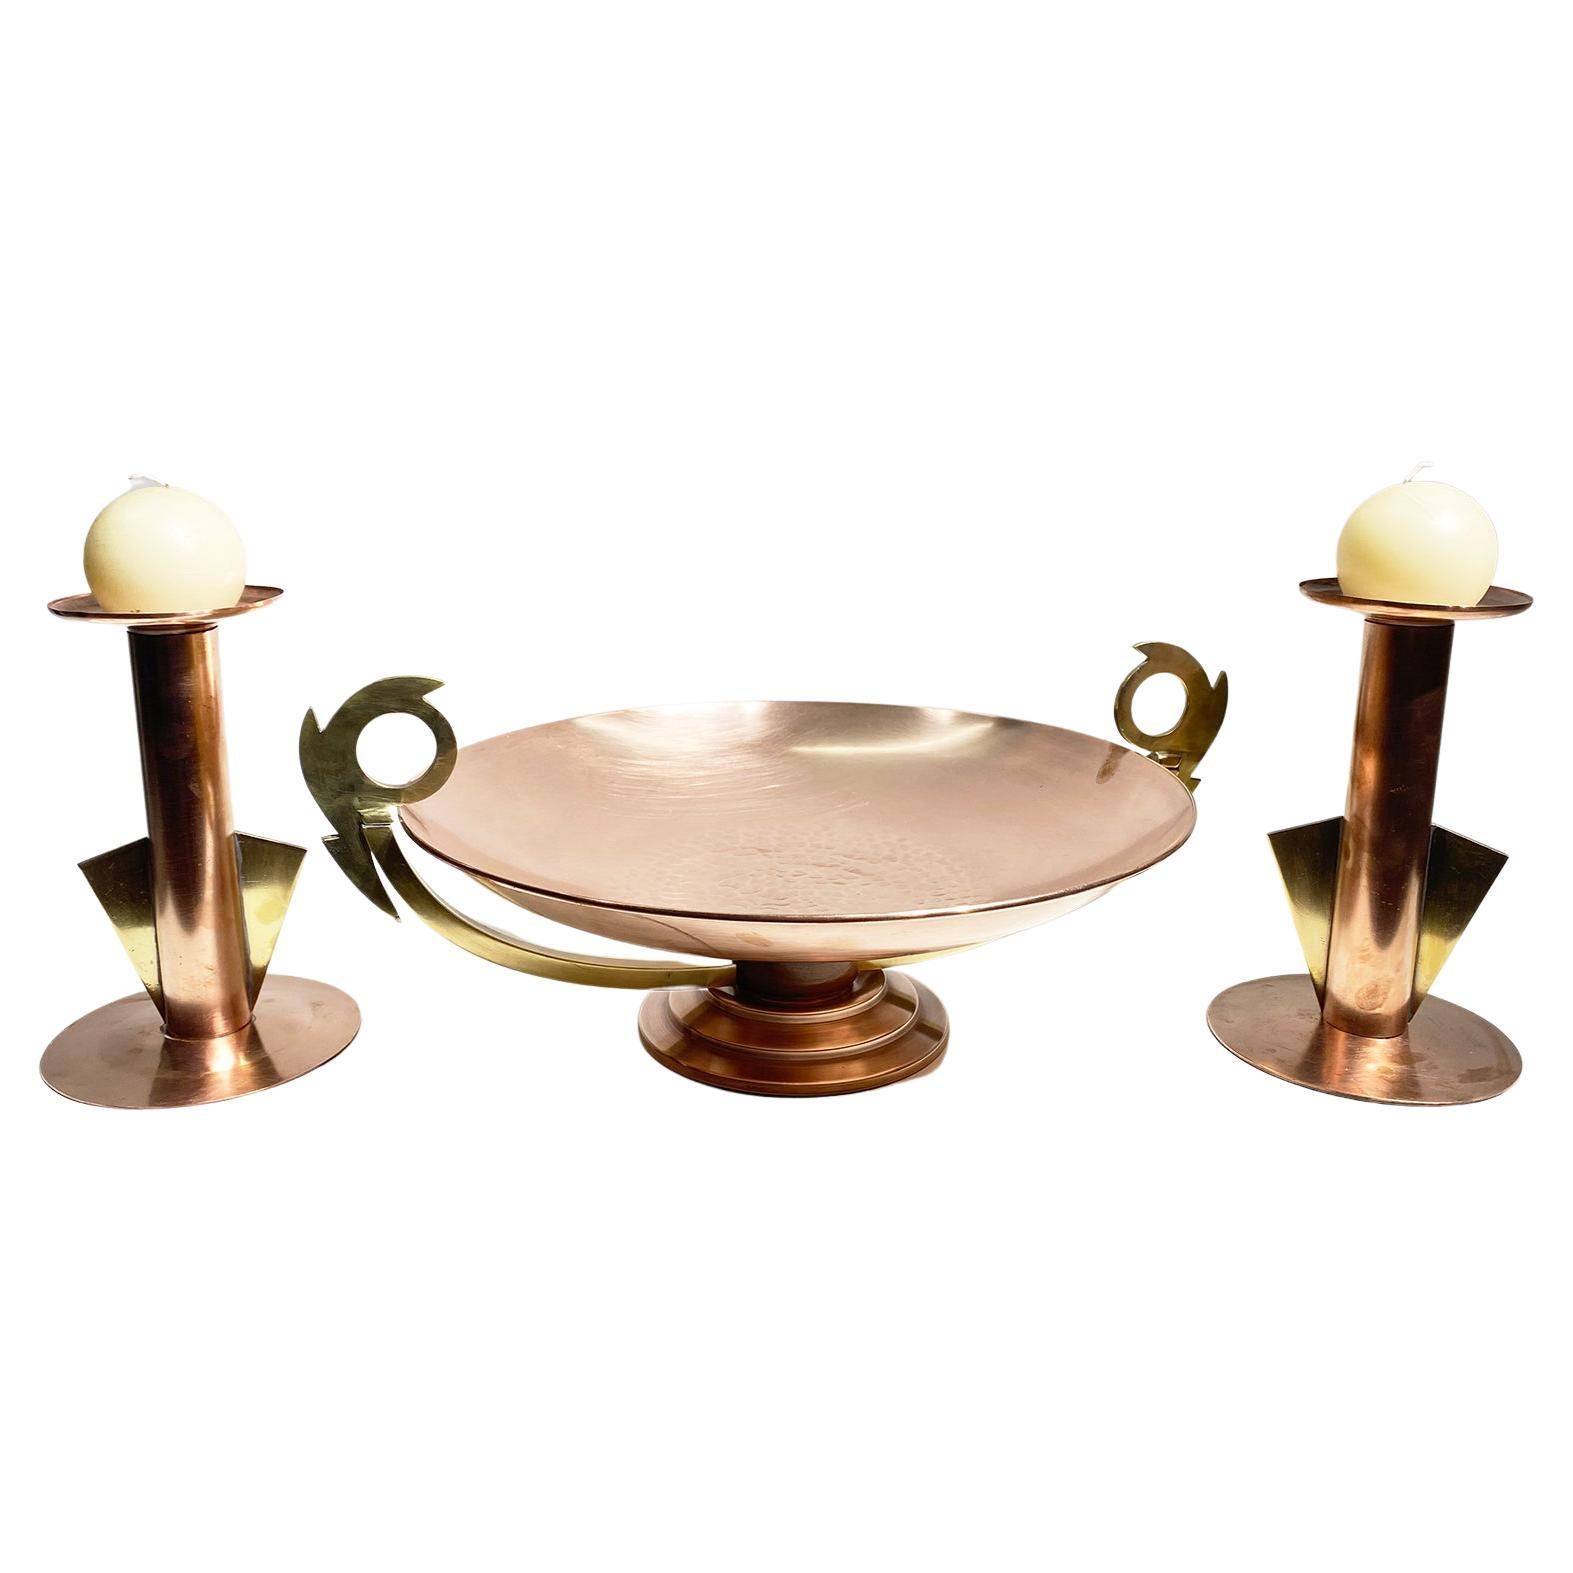 Late 19th Century Hand-Hammered Copper Tray with Candle Holders For Sale